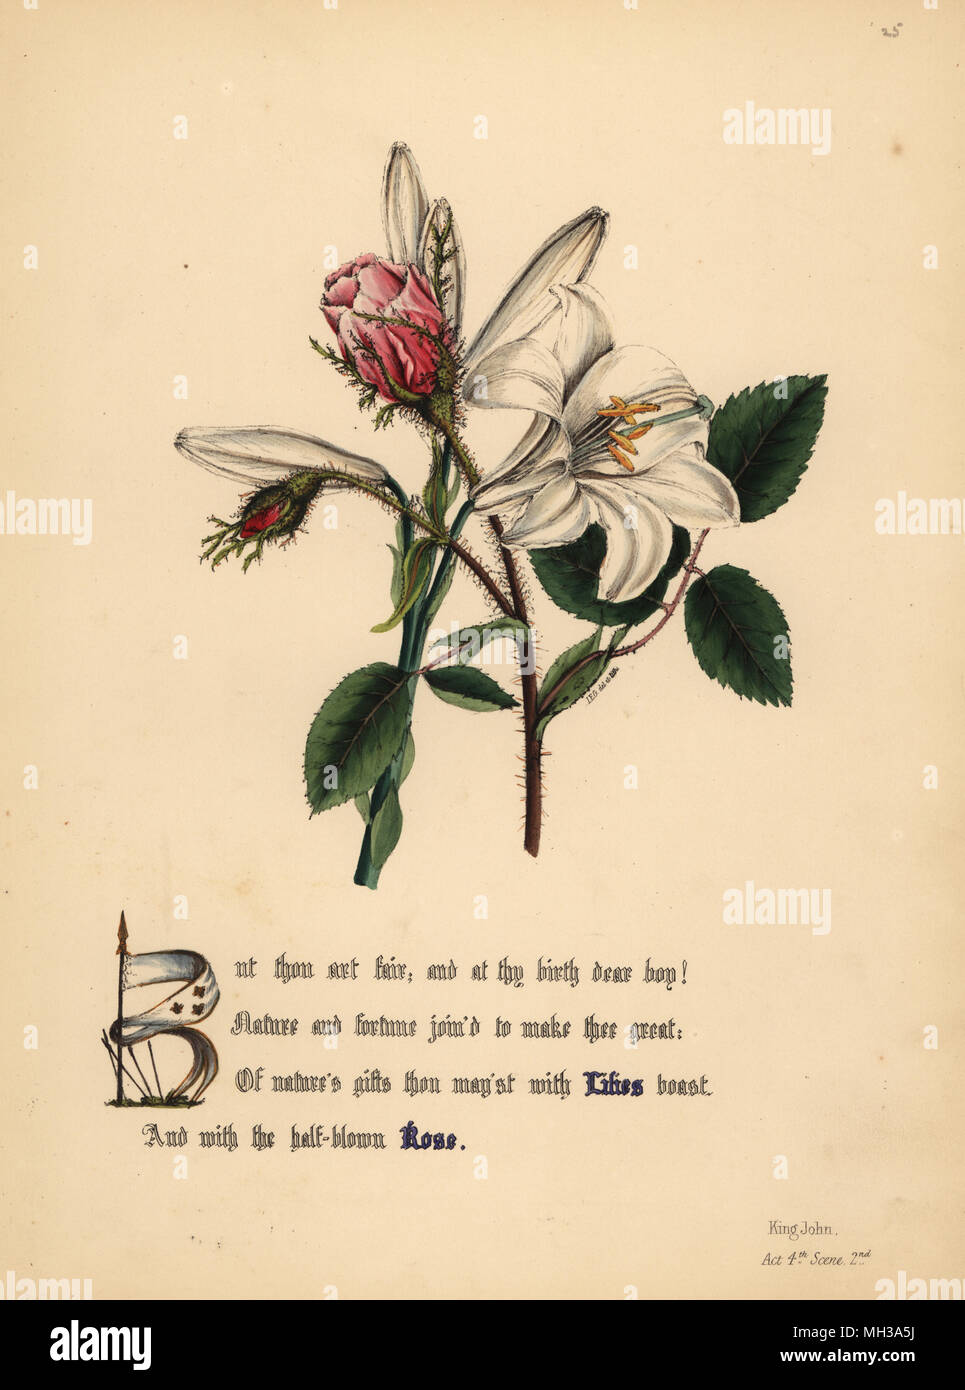 Lilies and Roses (King John). Handcoioured botanical illustration drawn and lithographed by Jane Elizabeth Giraud from The Flowers of Shakespeare, Day and Haghe, London, 1845. Stock Photo